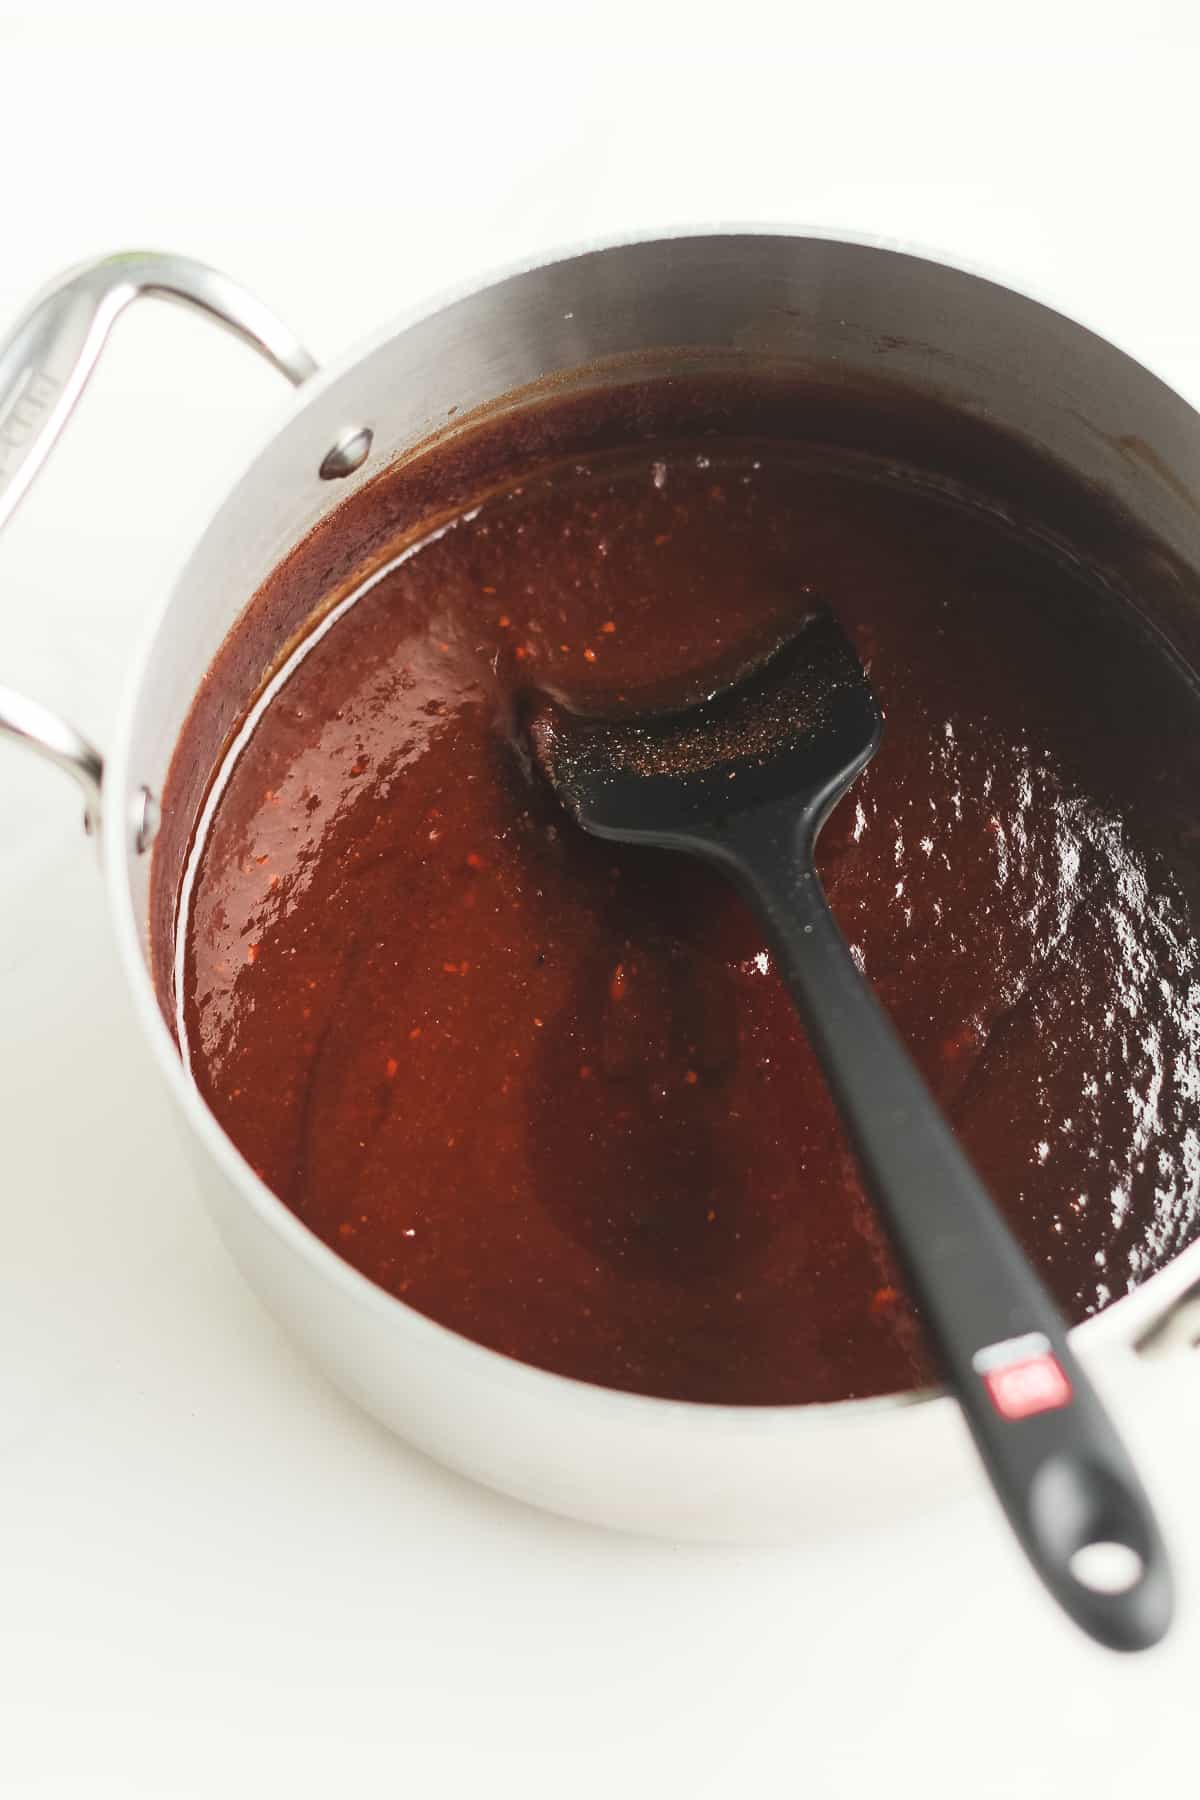 A pan of the sauce cooking.